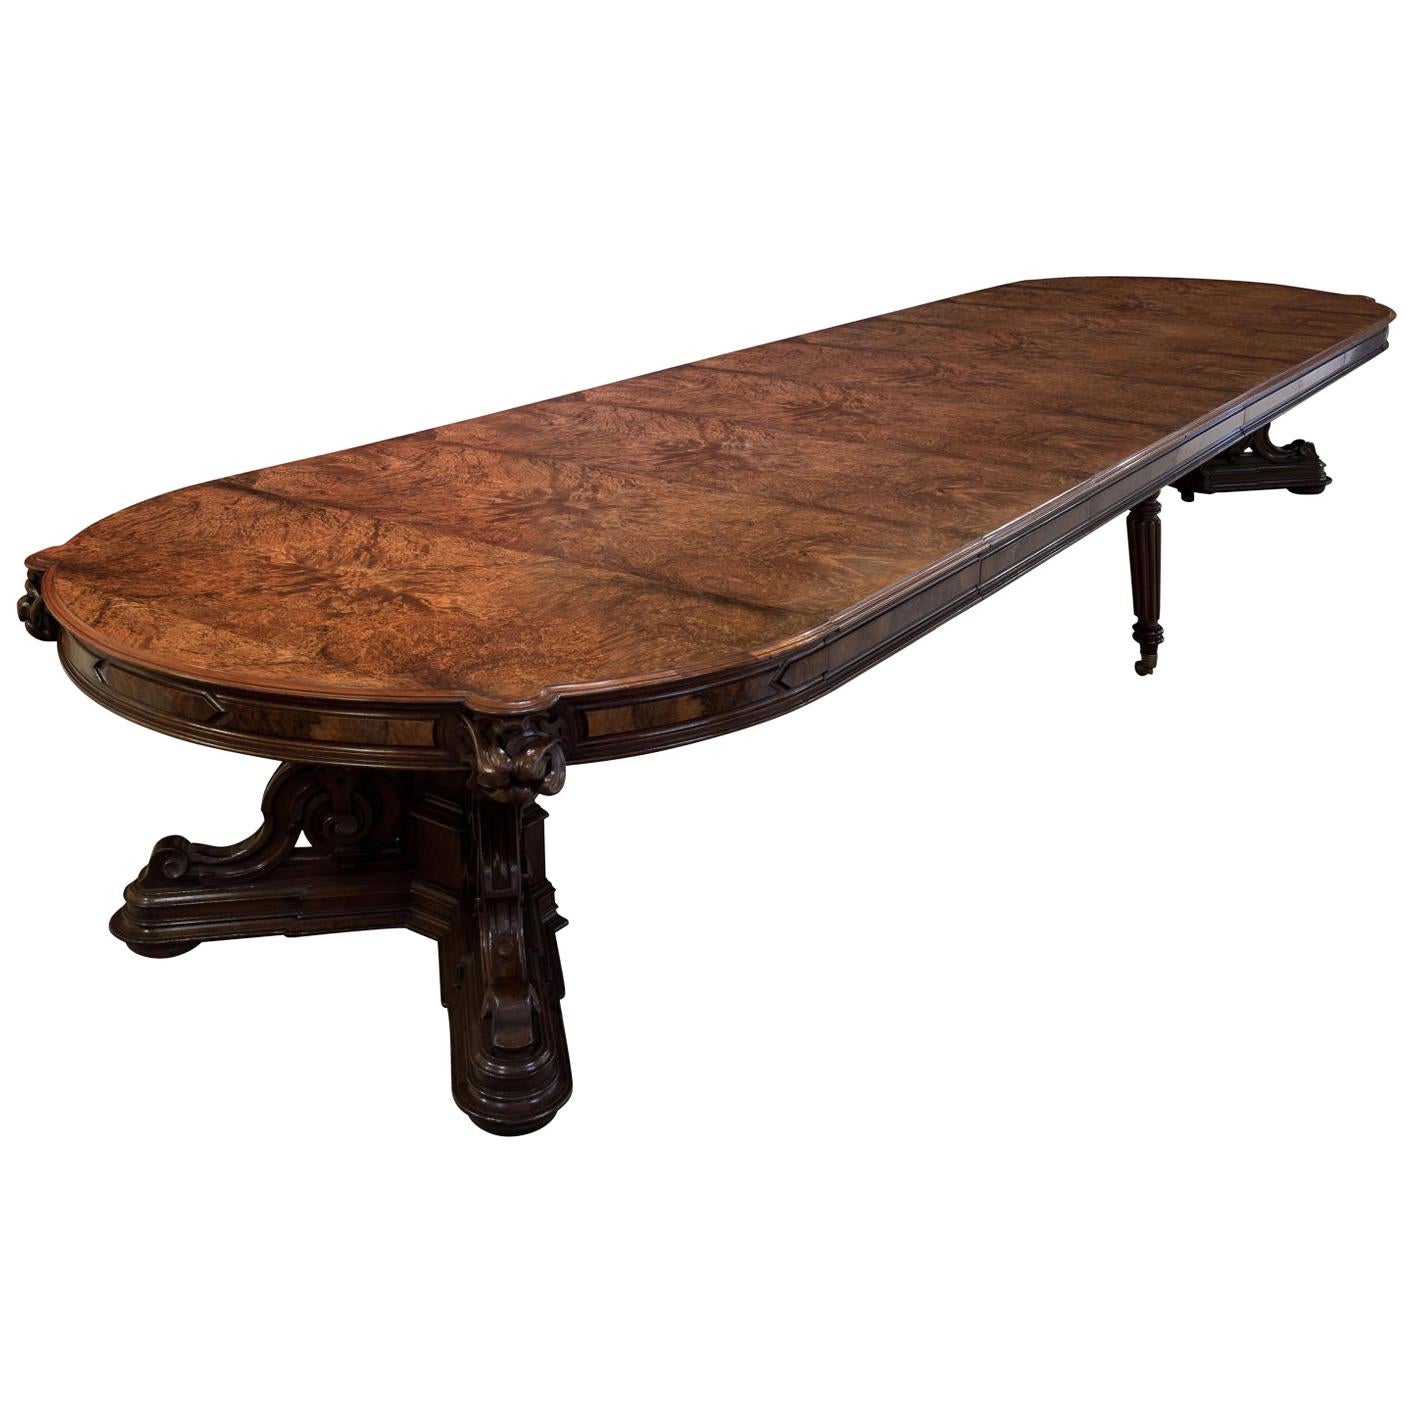 Large Burr Walnut Extending Dining Table or Boardroom Table, circa 1851